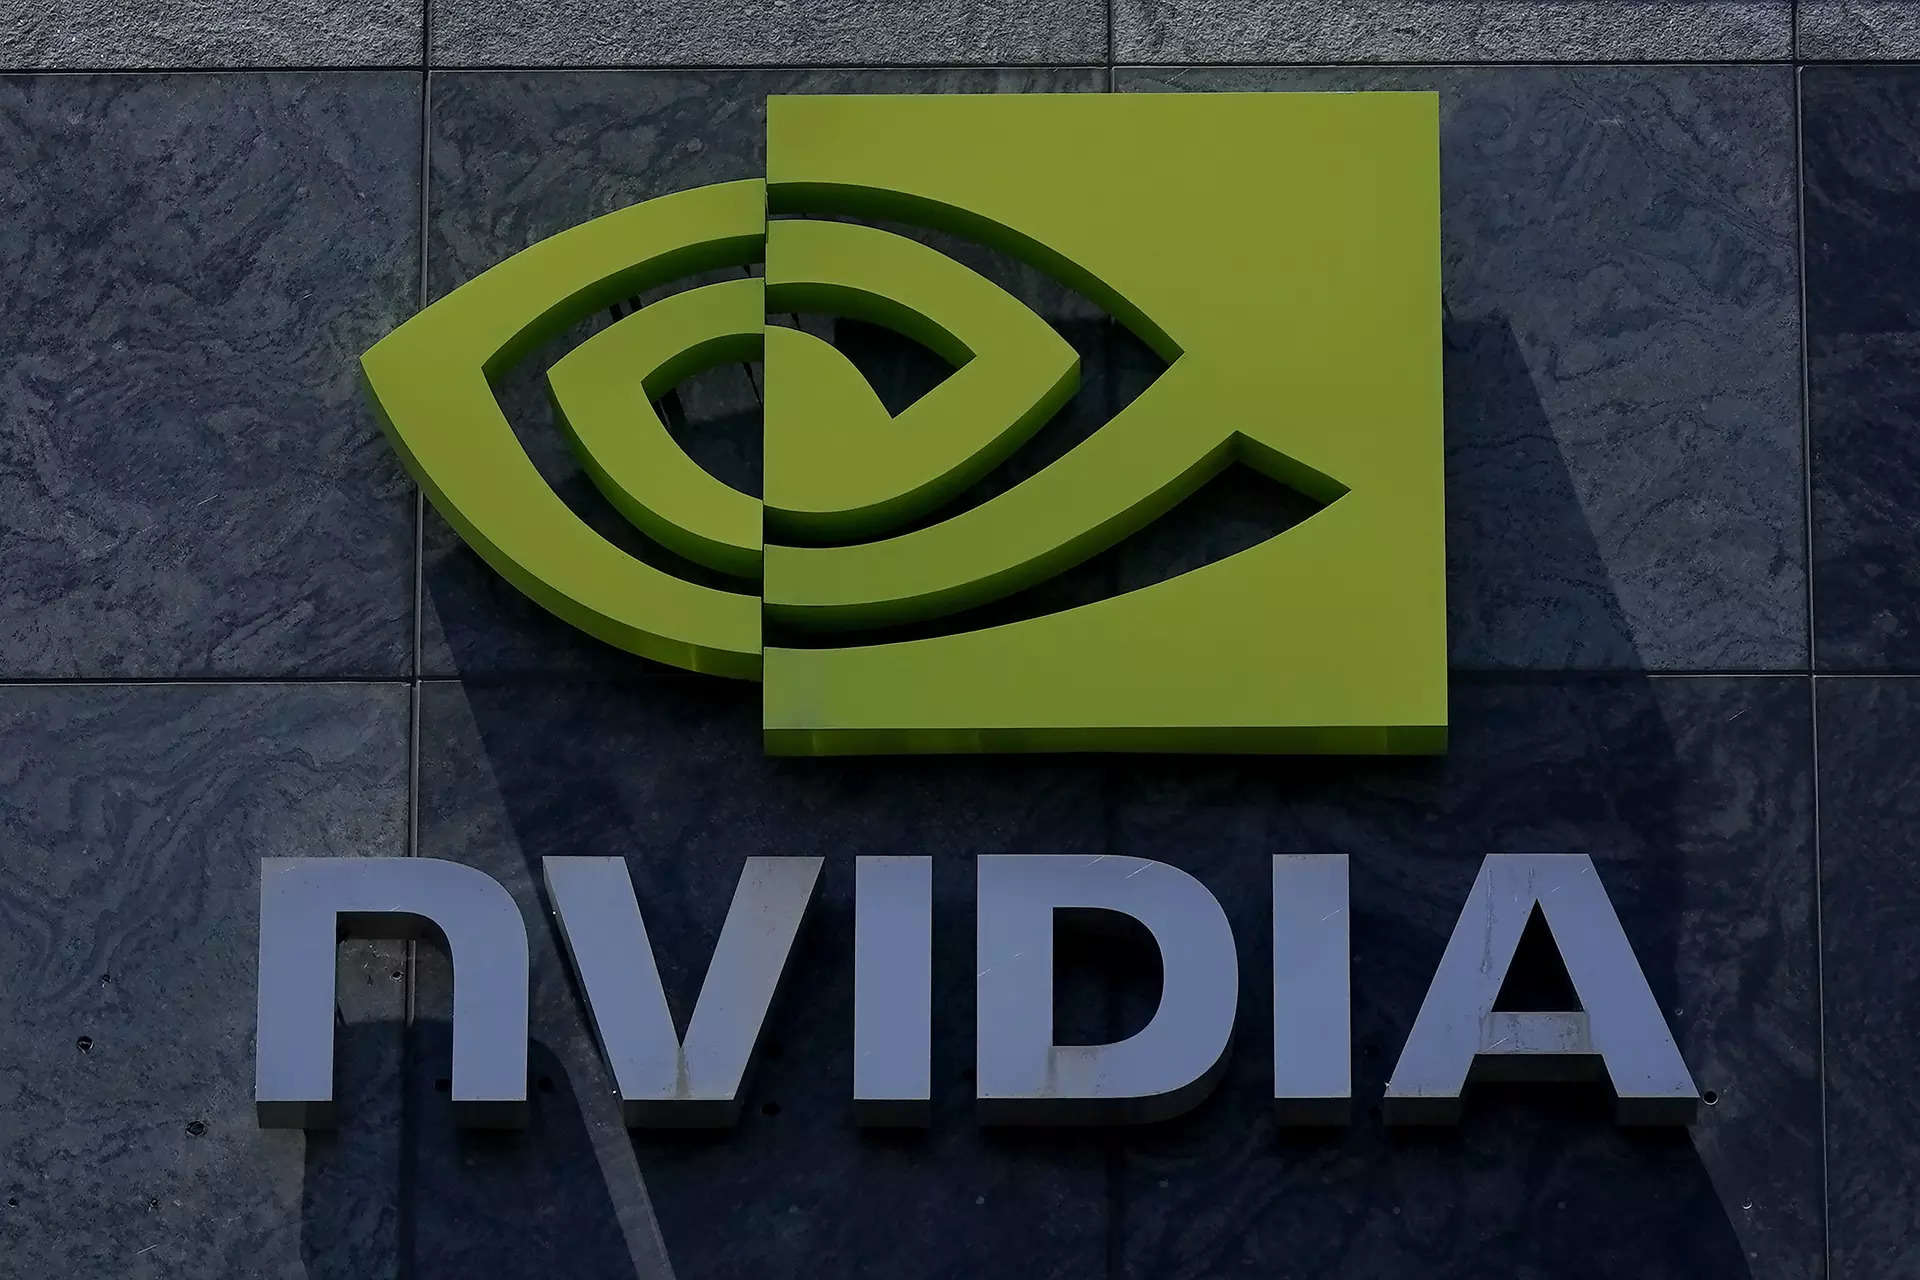 These are the three stocks which may outperform Nvidia by 2030 